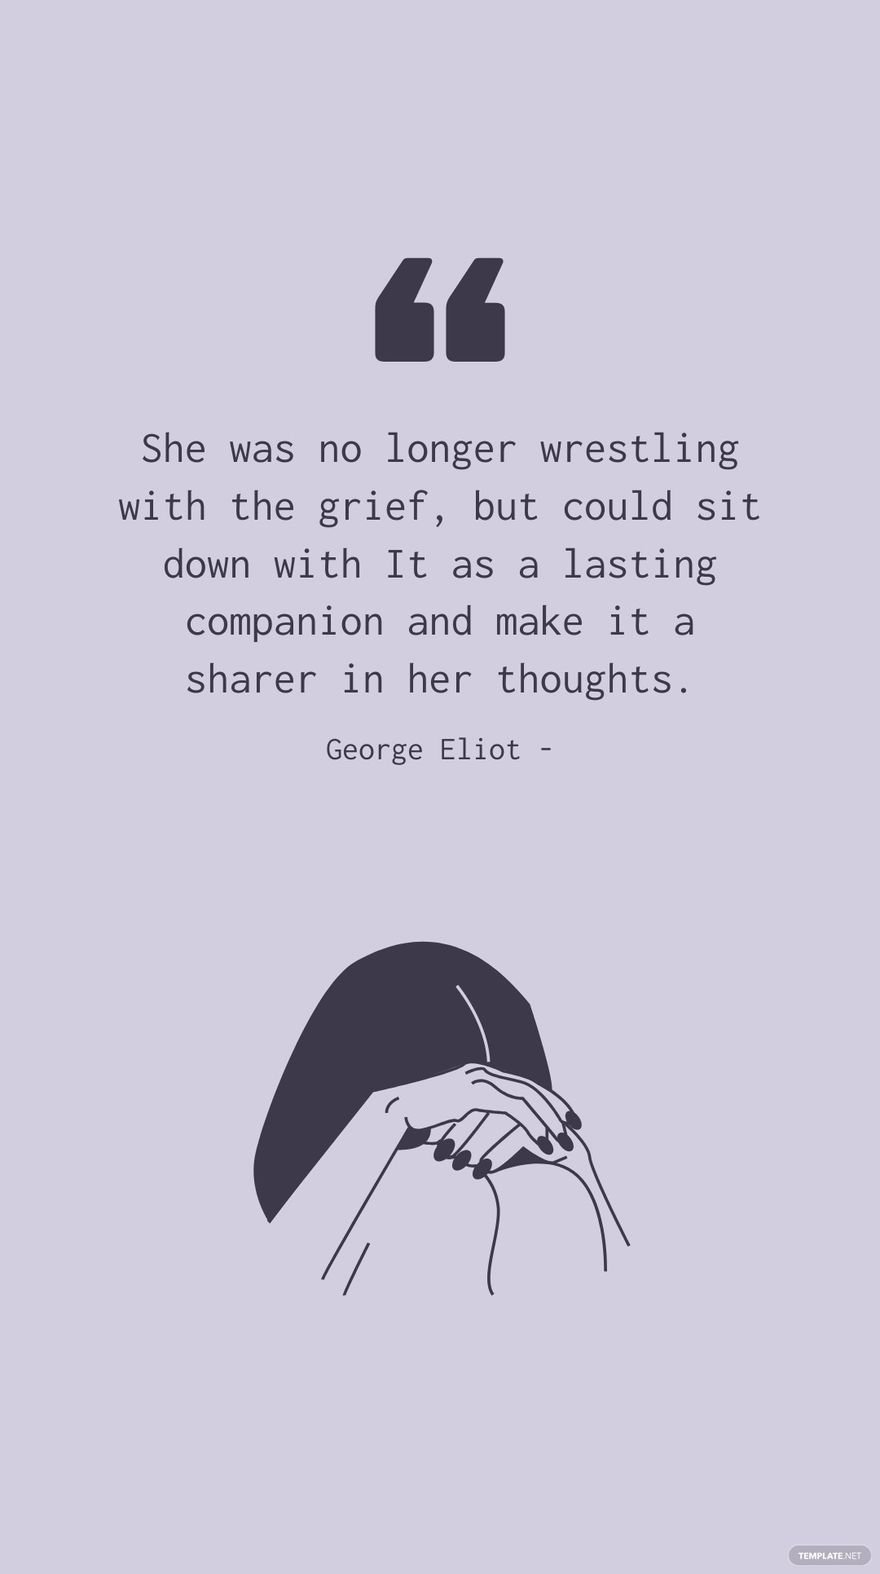 George Eliot - She was no longer wrestling with the grief, but could sit down with It as a lasting companion and make it a sharer in her thoughts.